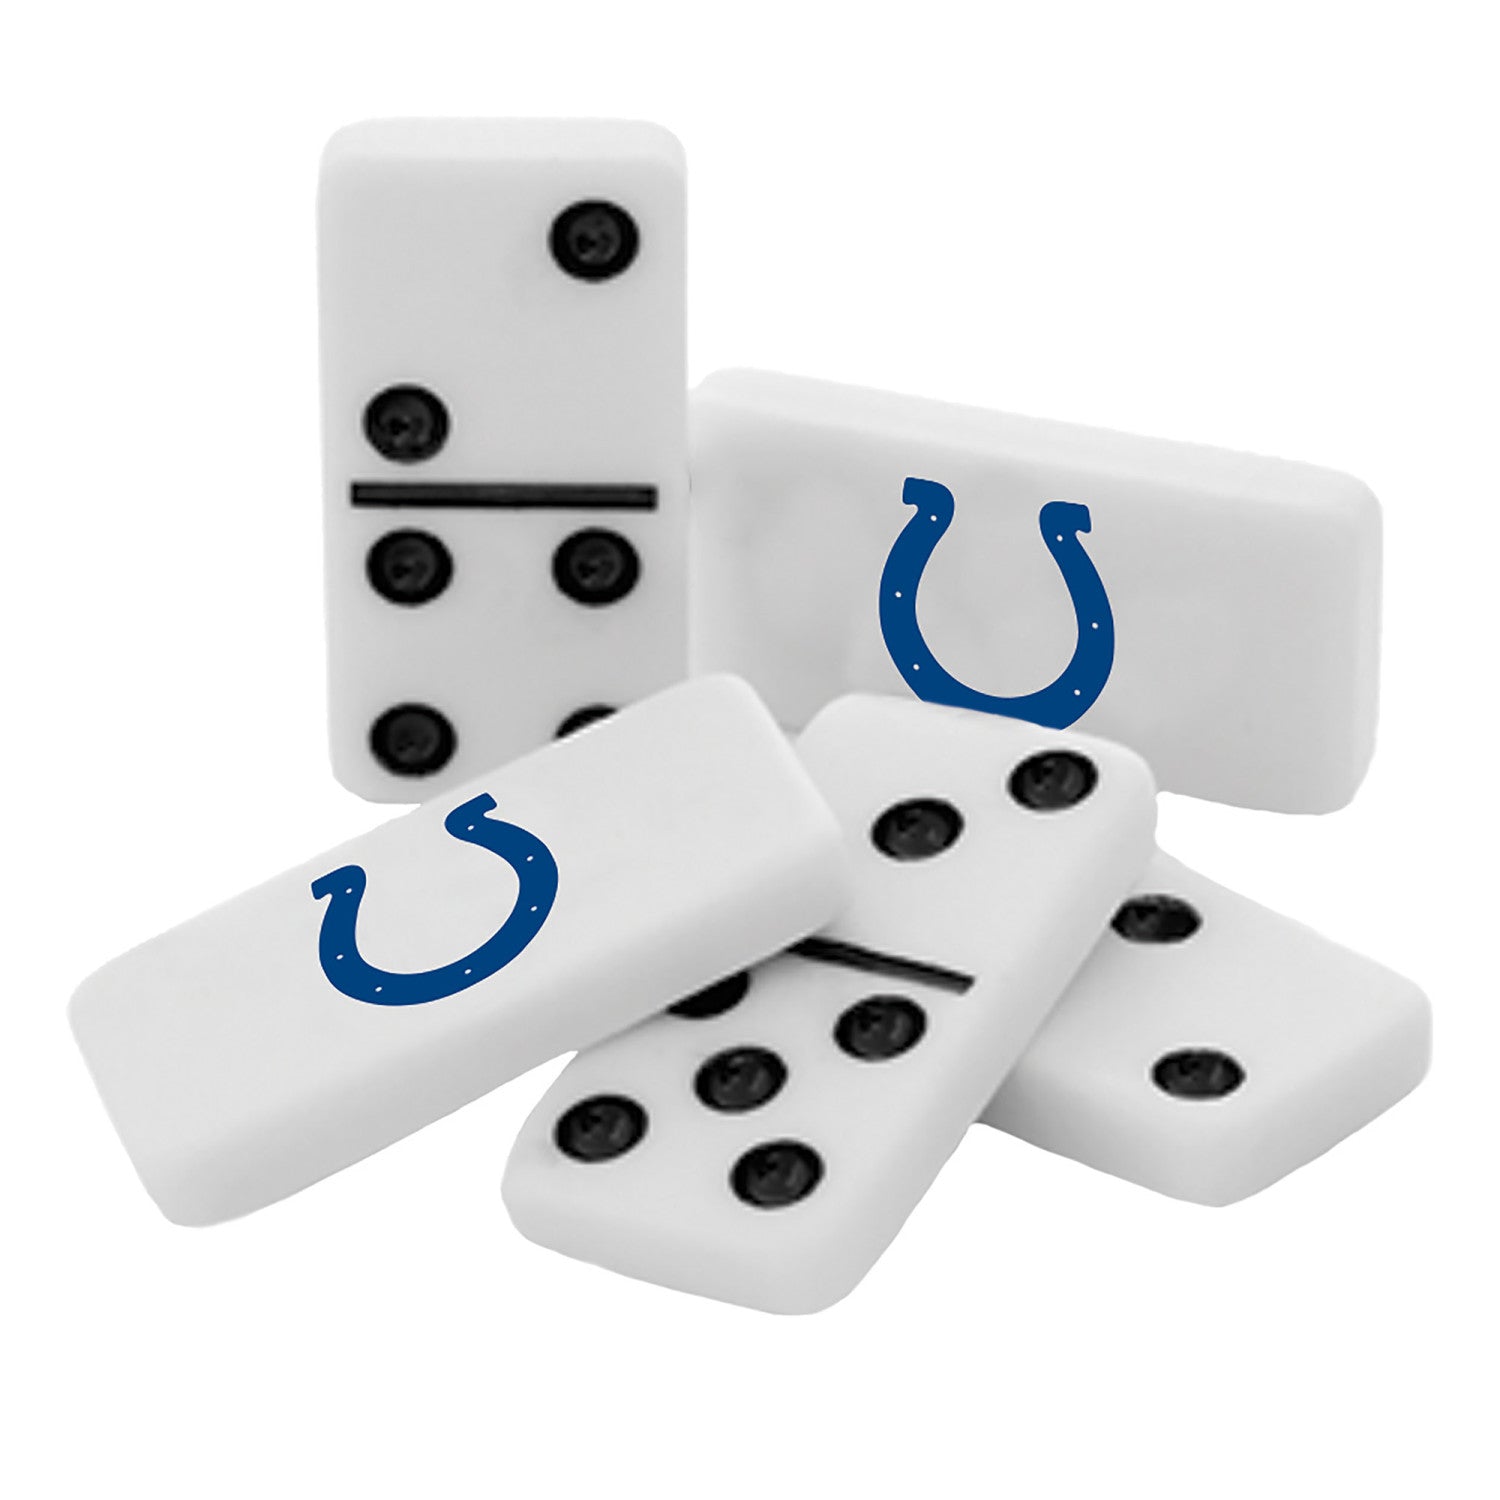 Indianapolis Colts Dominoes